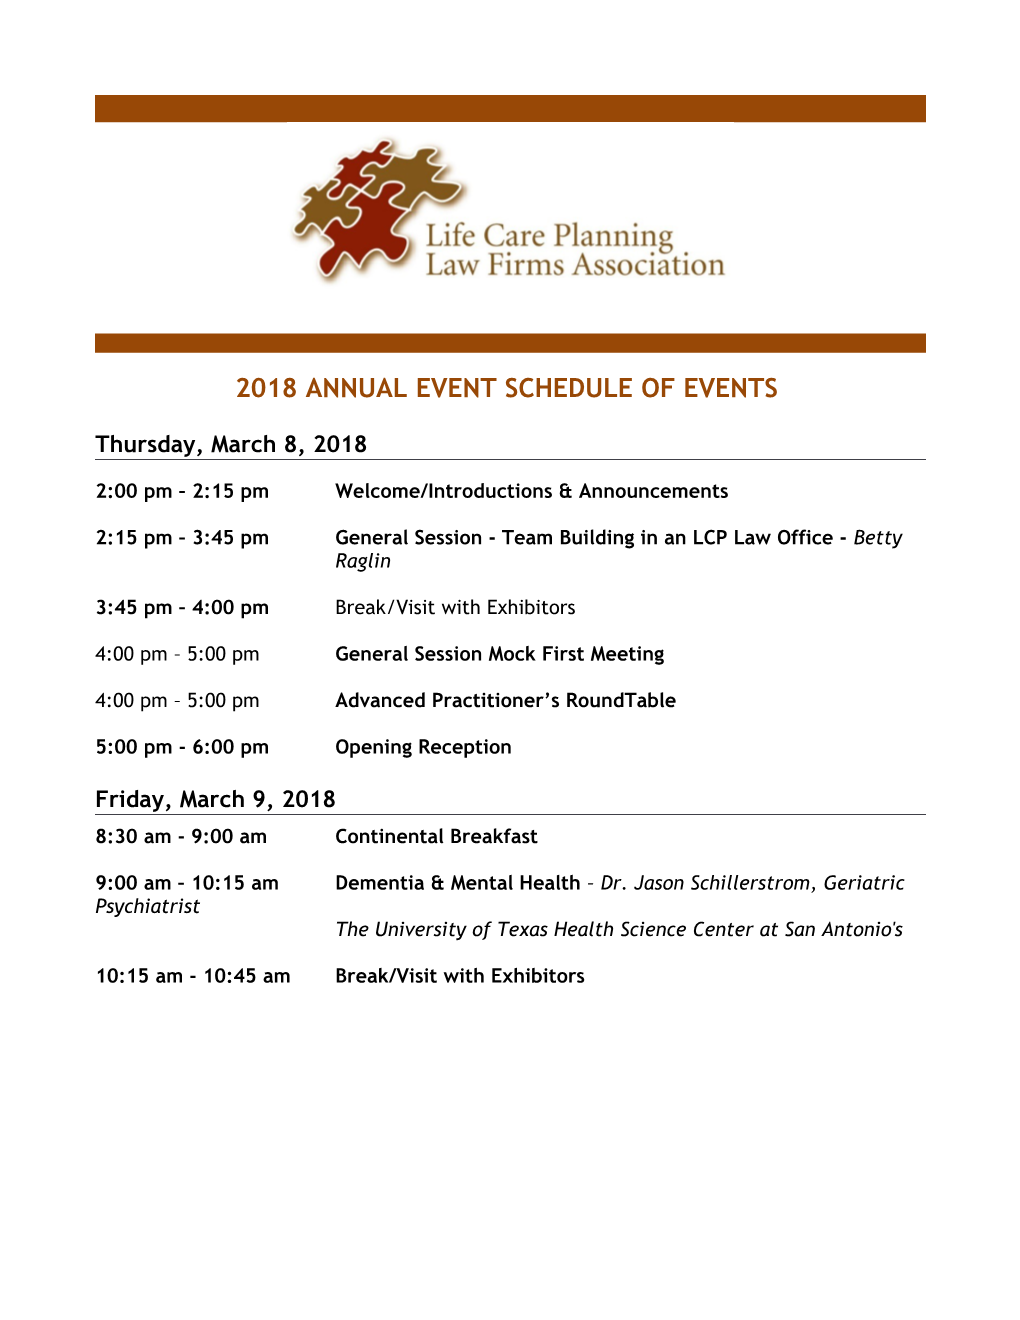 2018 Annual Event Schedule of Events